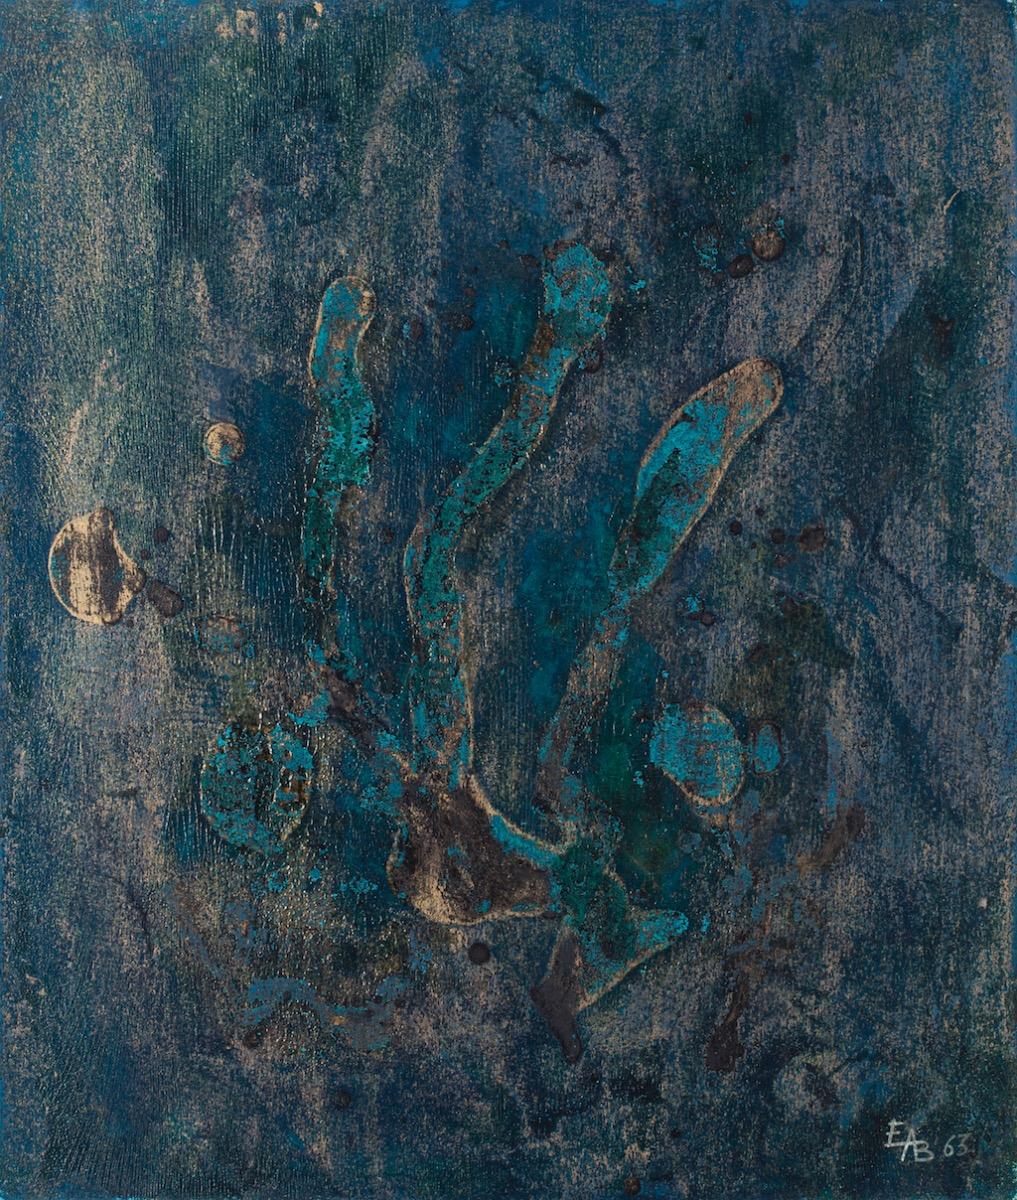 Blue Composition is a beautiful mixed media, original painting on cardboard, realized in 1963 by the artist Esy A. Belluzzi, Hand-signed on the lower" EAB" and dated.

In excellent conditions.

The artwork represents mysterious shapes and forms in